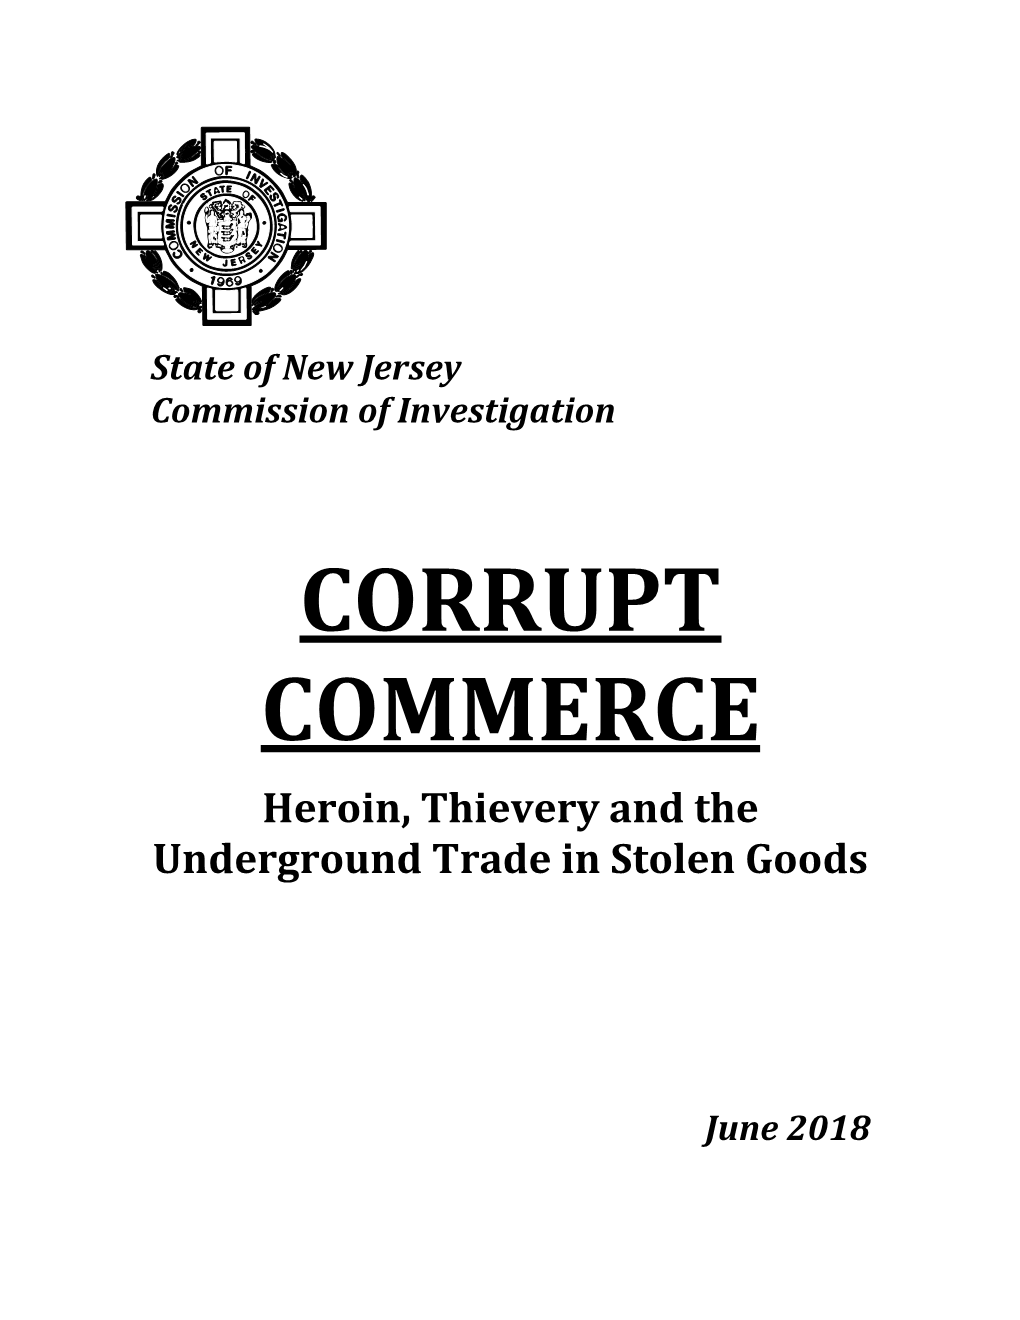 CORRUPT COMMERCE Heroin, Thievery and the Underground Trade in Stolen Goods